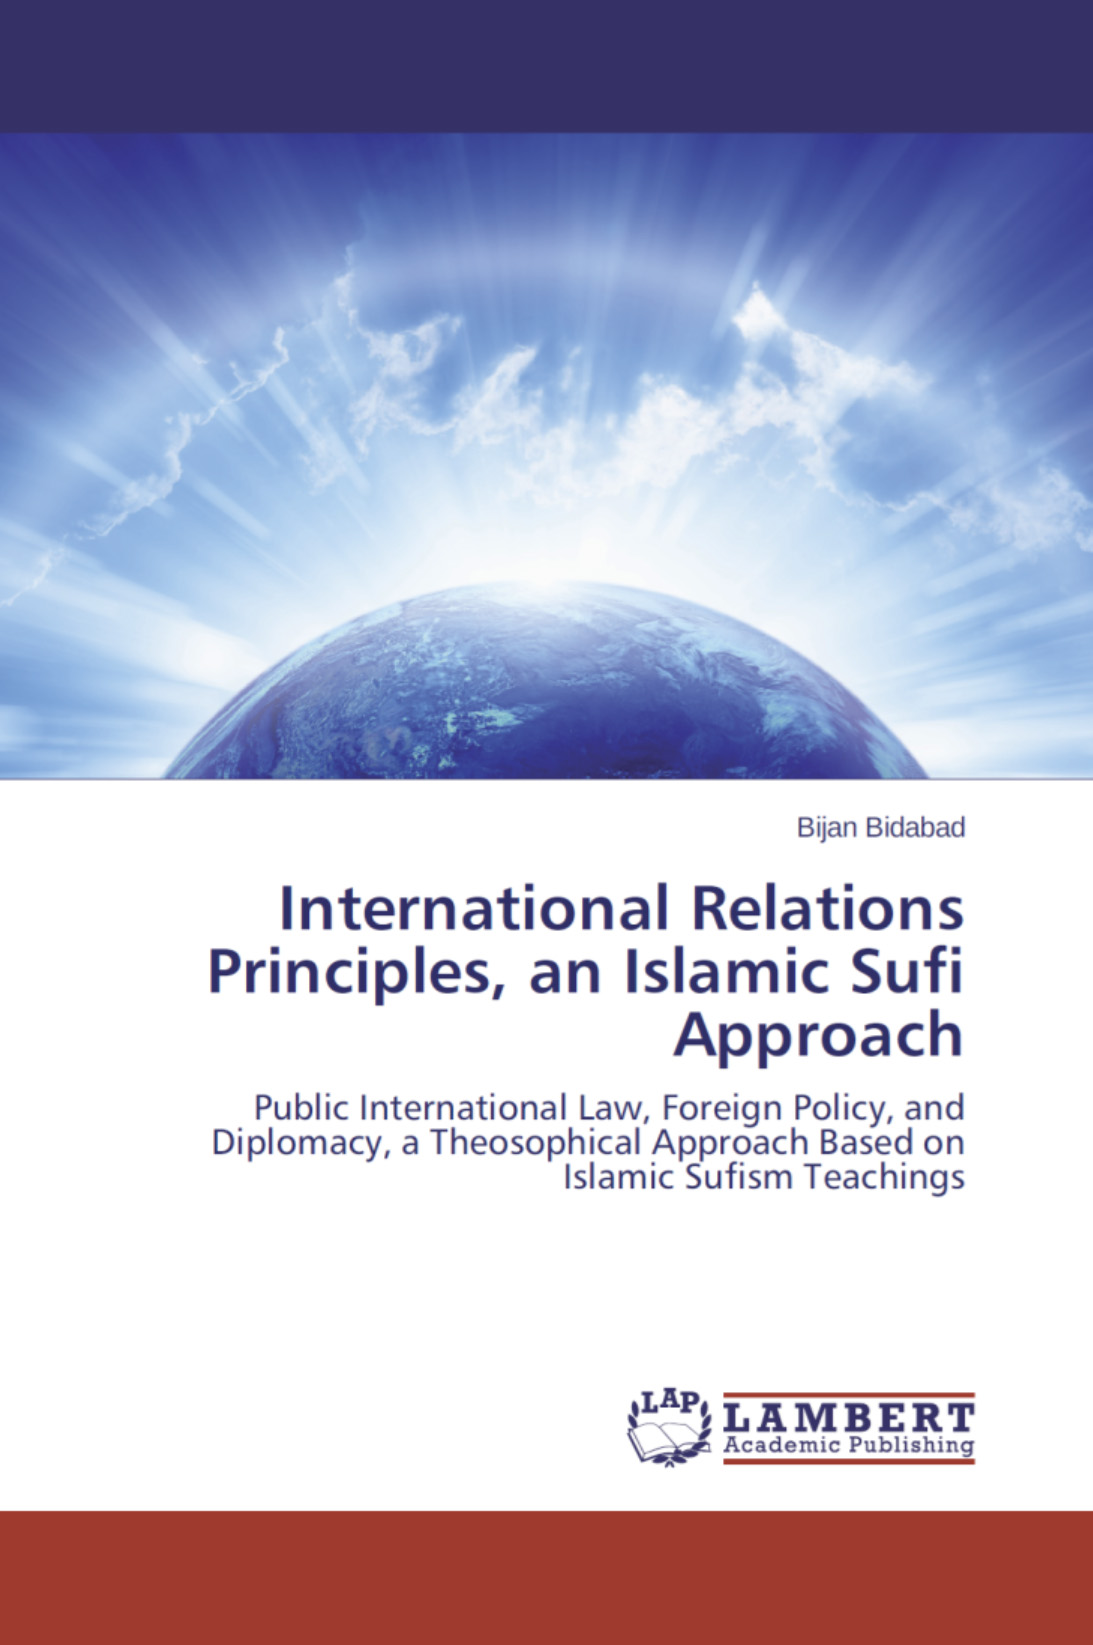 Mystical (Sufi) Foundation of International Relations in Islam, Public International Law, Foreign Policy and Diplomacy, a Theosophy Approach based on Islamic Sufi Teachings